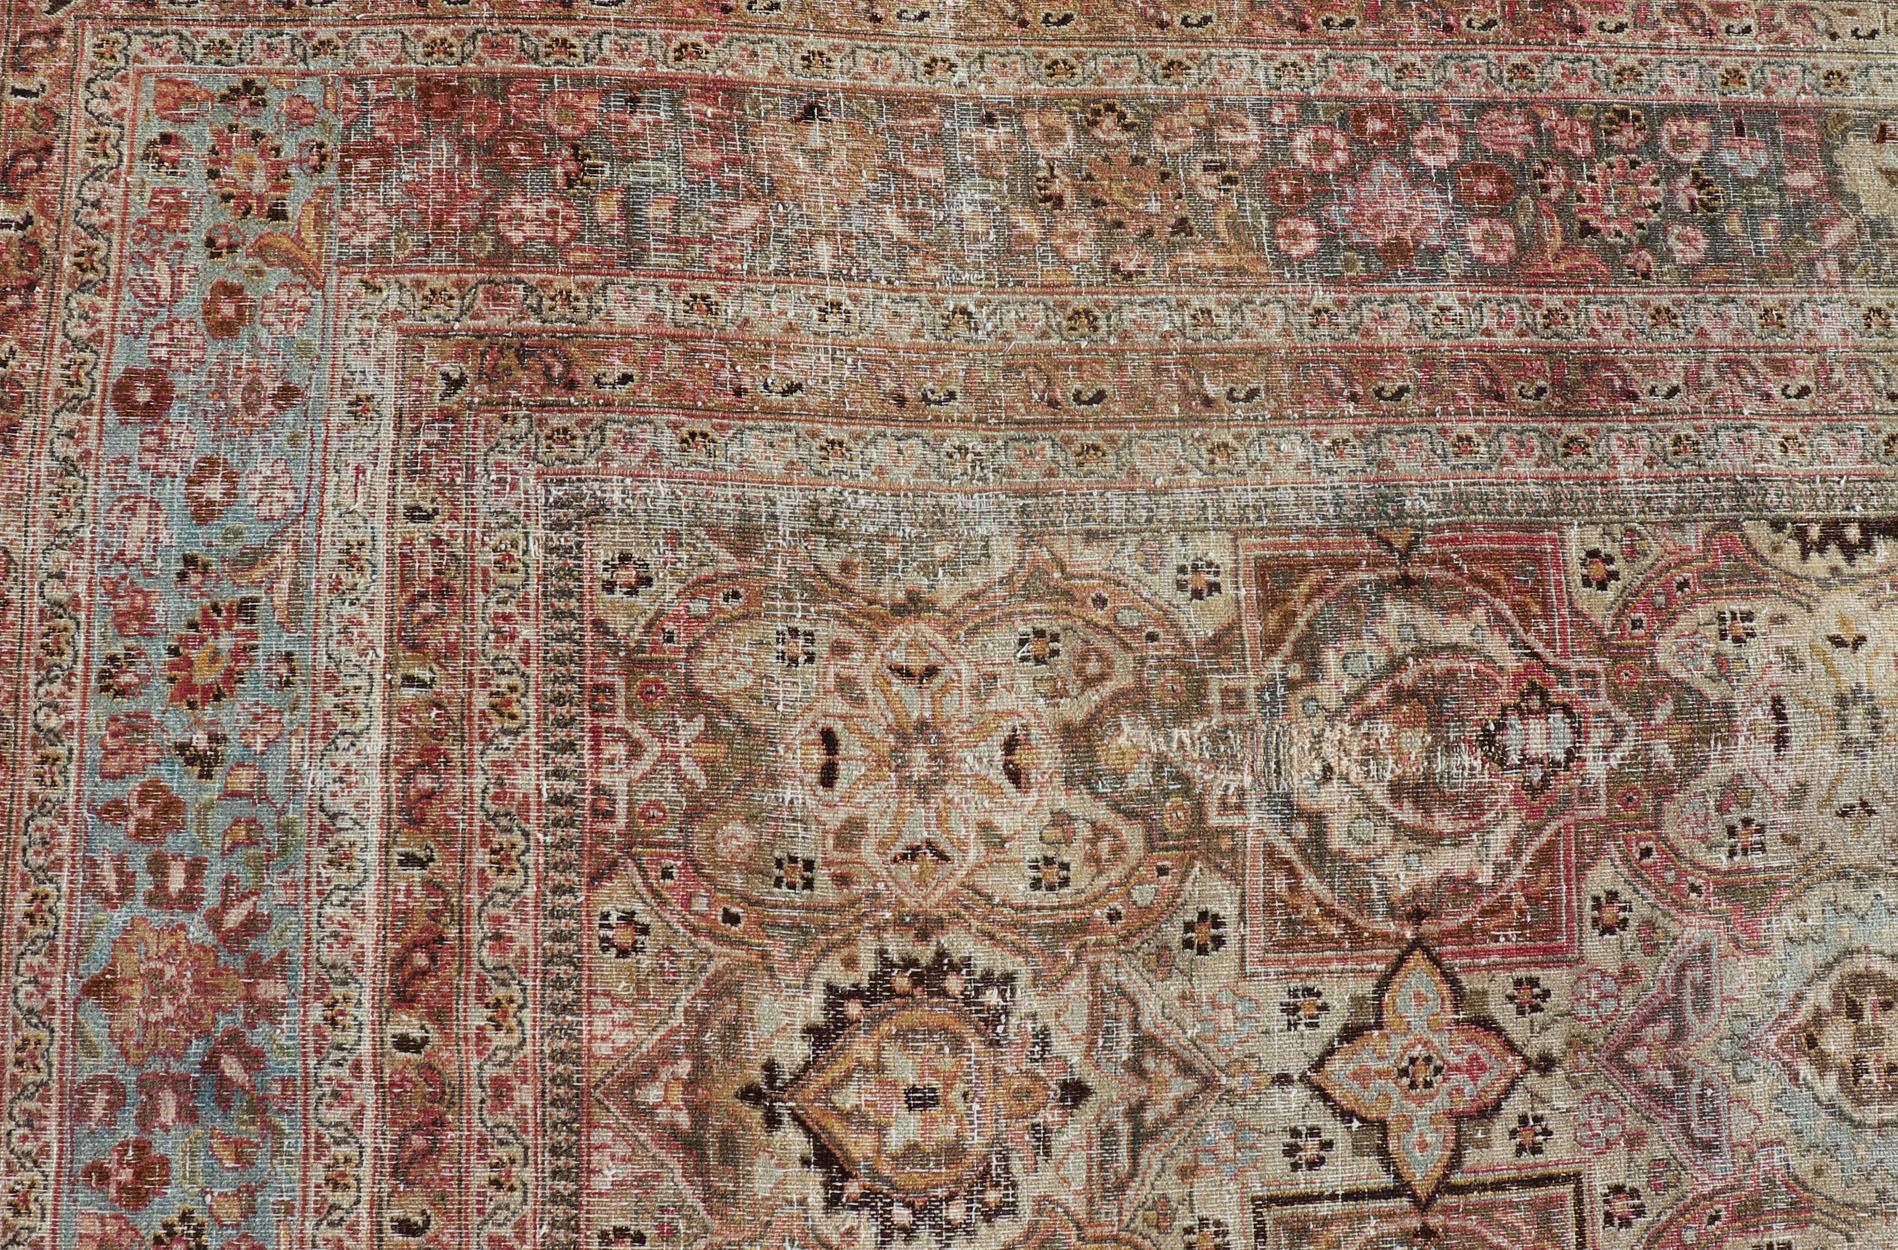  Antique Persian Khorassan Rug with Palmettes, Geometric Flowers in Soft Tones For Sale 7